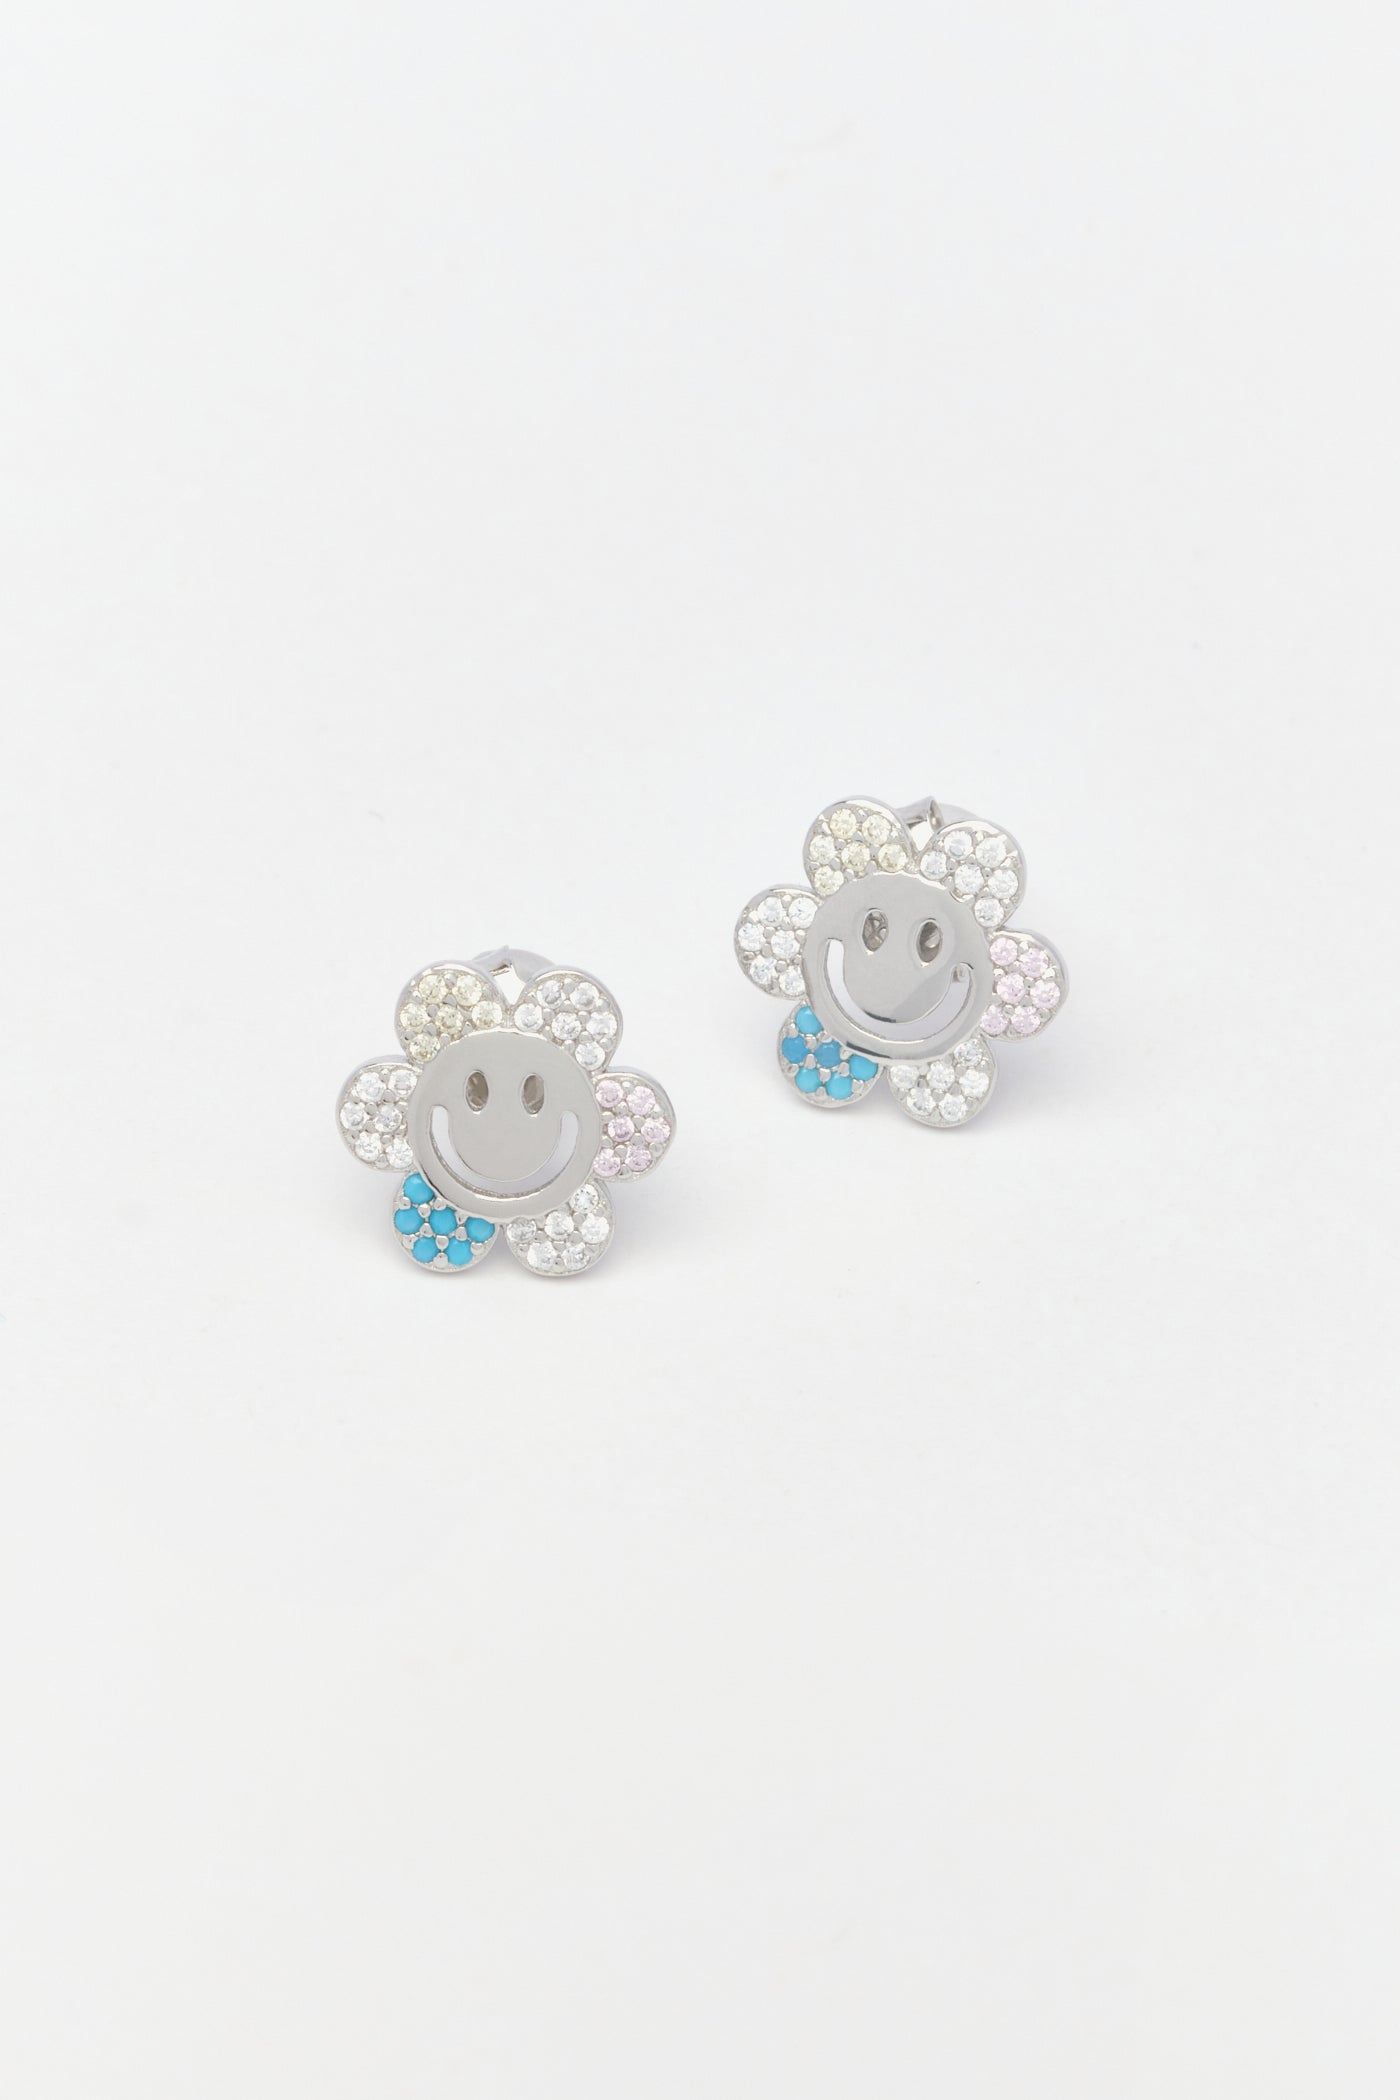 Smiley Daisy Pave Stud Earrings